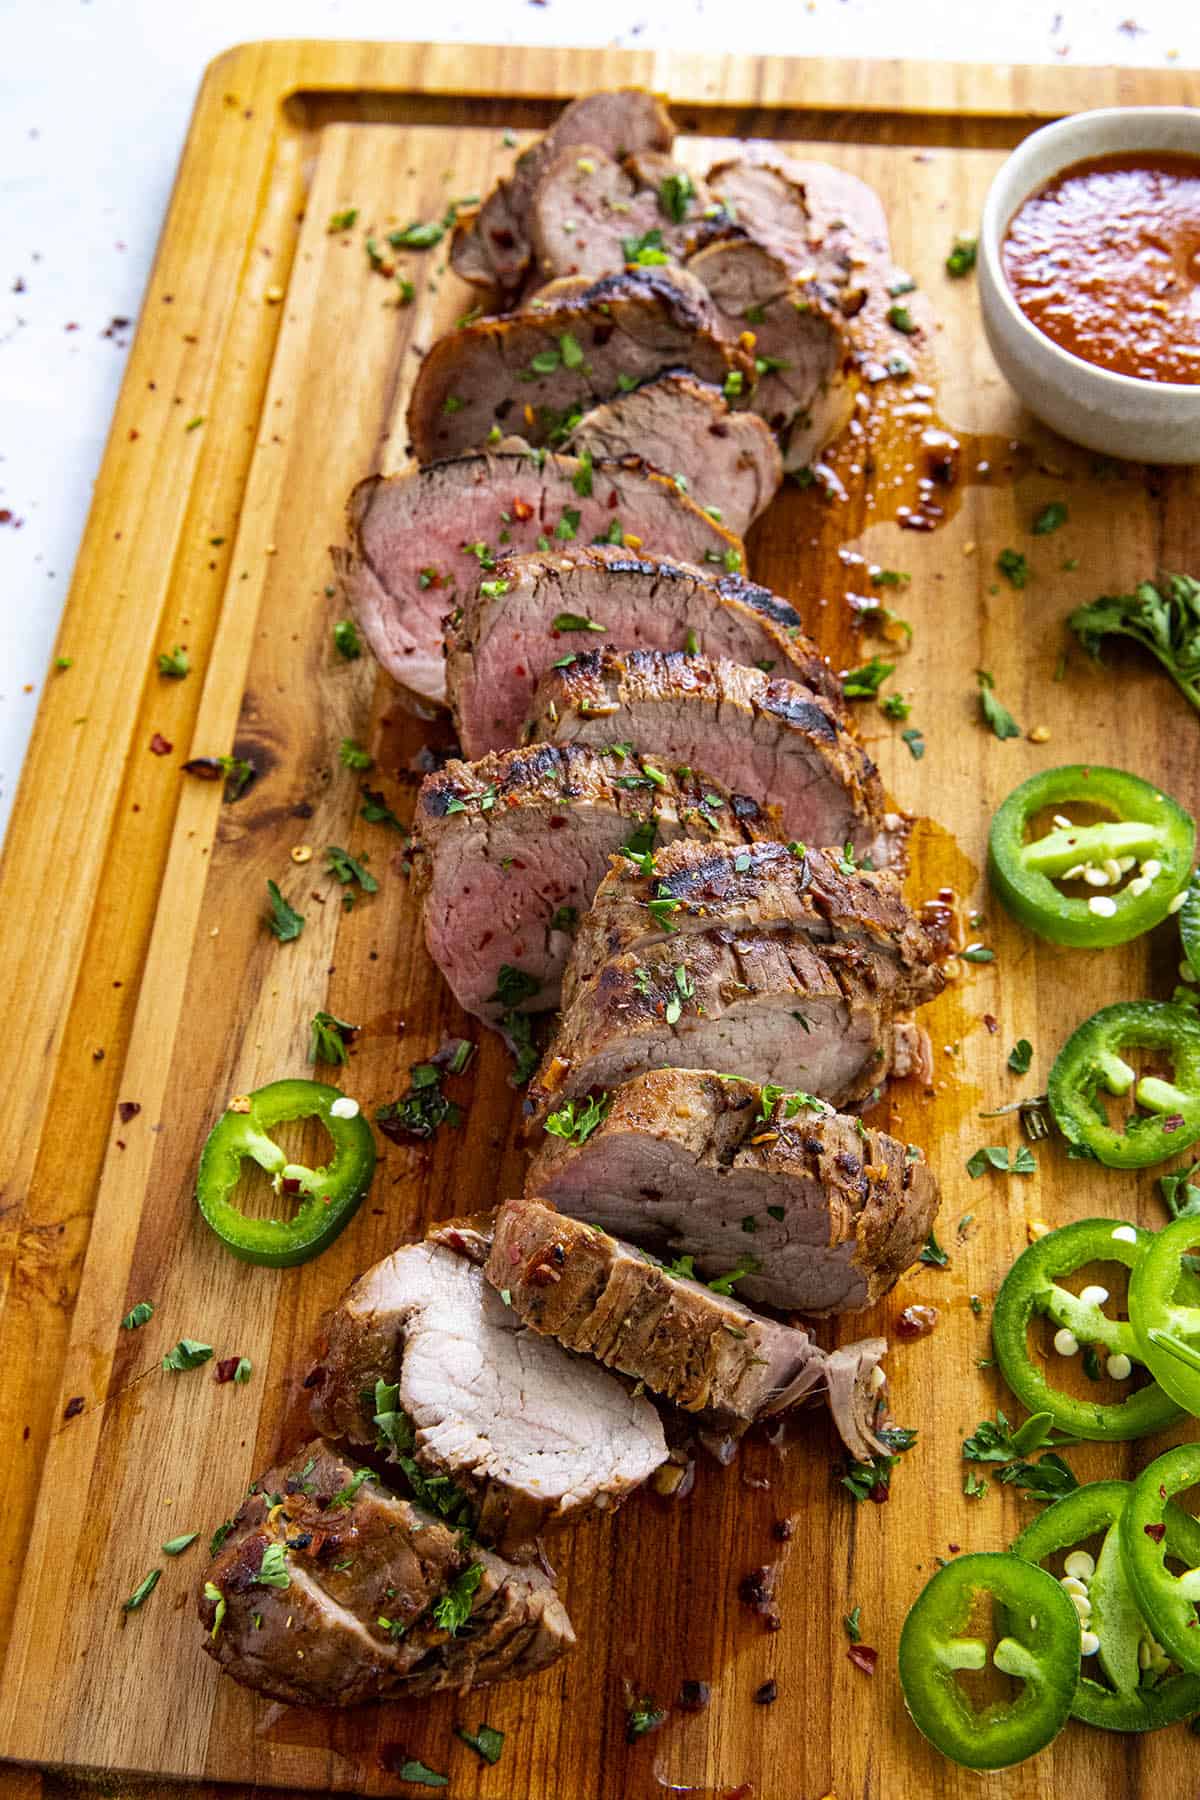 Sliced and grilled marinated pork tenderloin on a cutting board, ready to serve